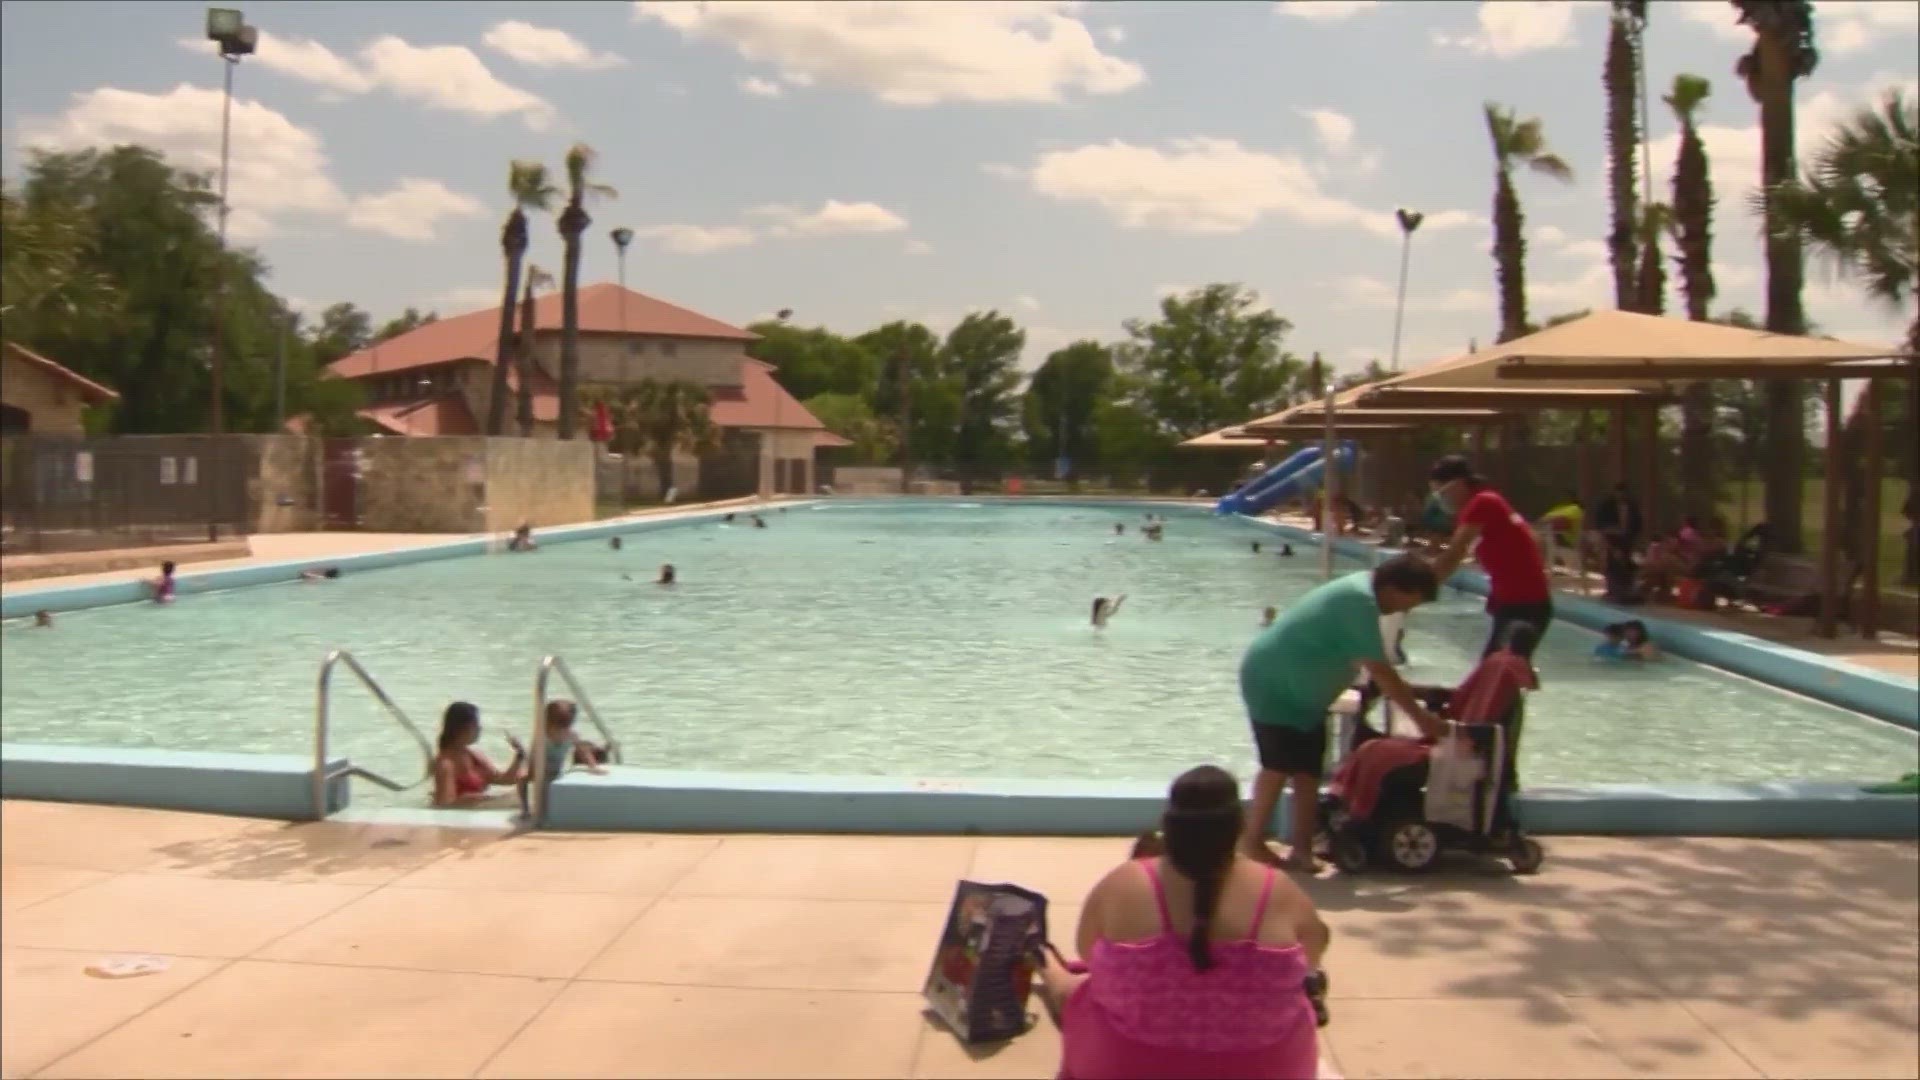 23 pools across the city are opening Saturday, June 17 and will have extended hours for the summer.